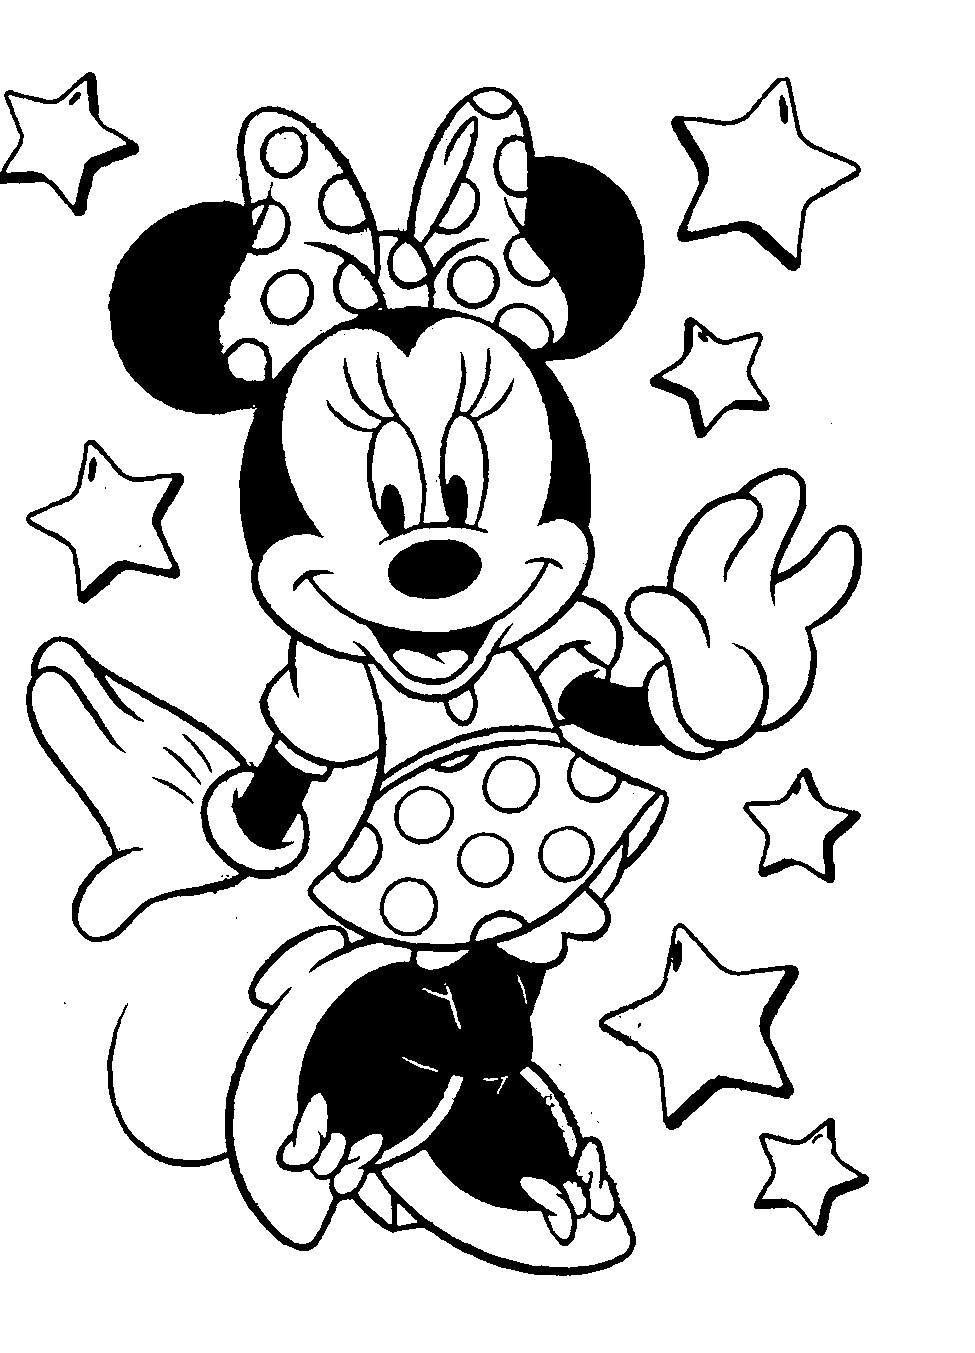 Minnie Mouse Coloring Pages Free Printable
 DISNEY COLORING PAGES